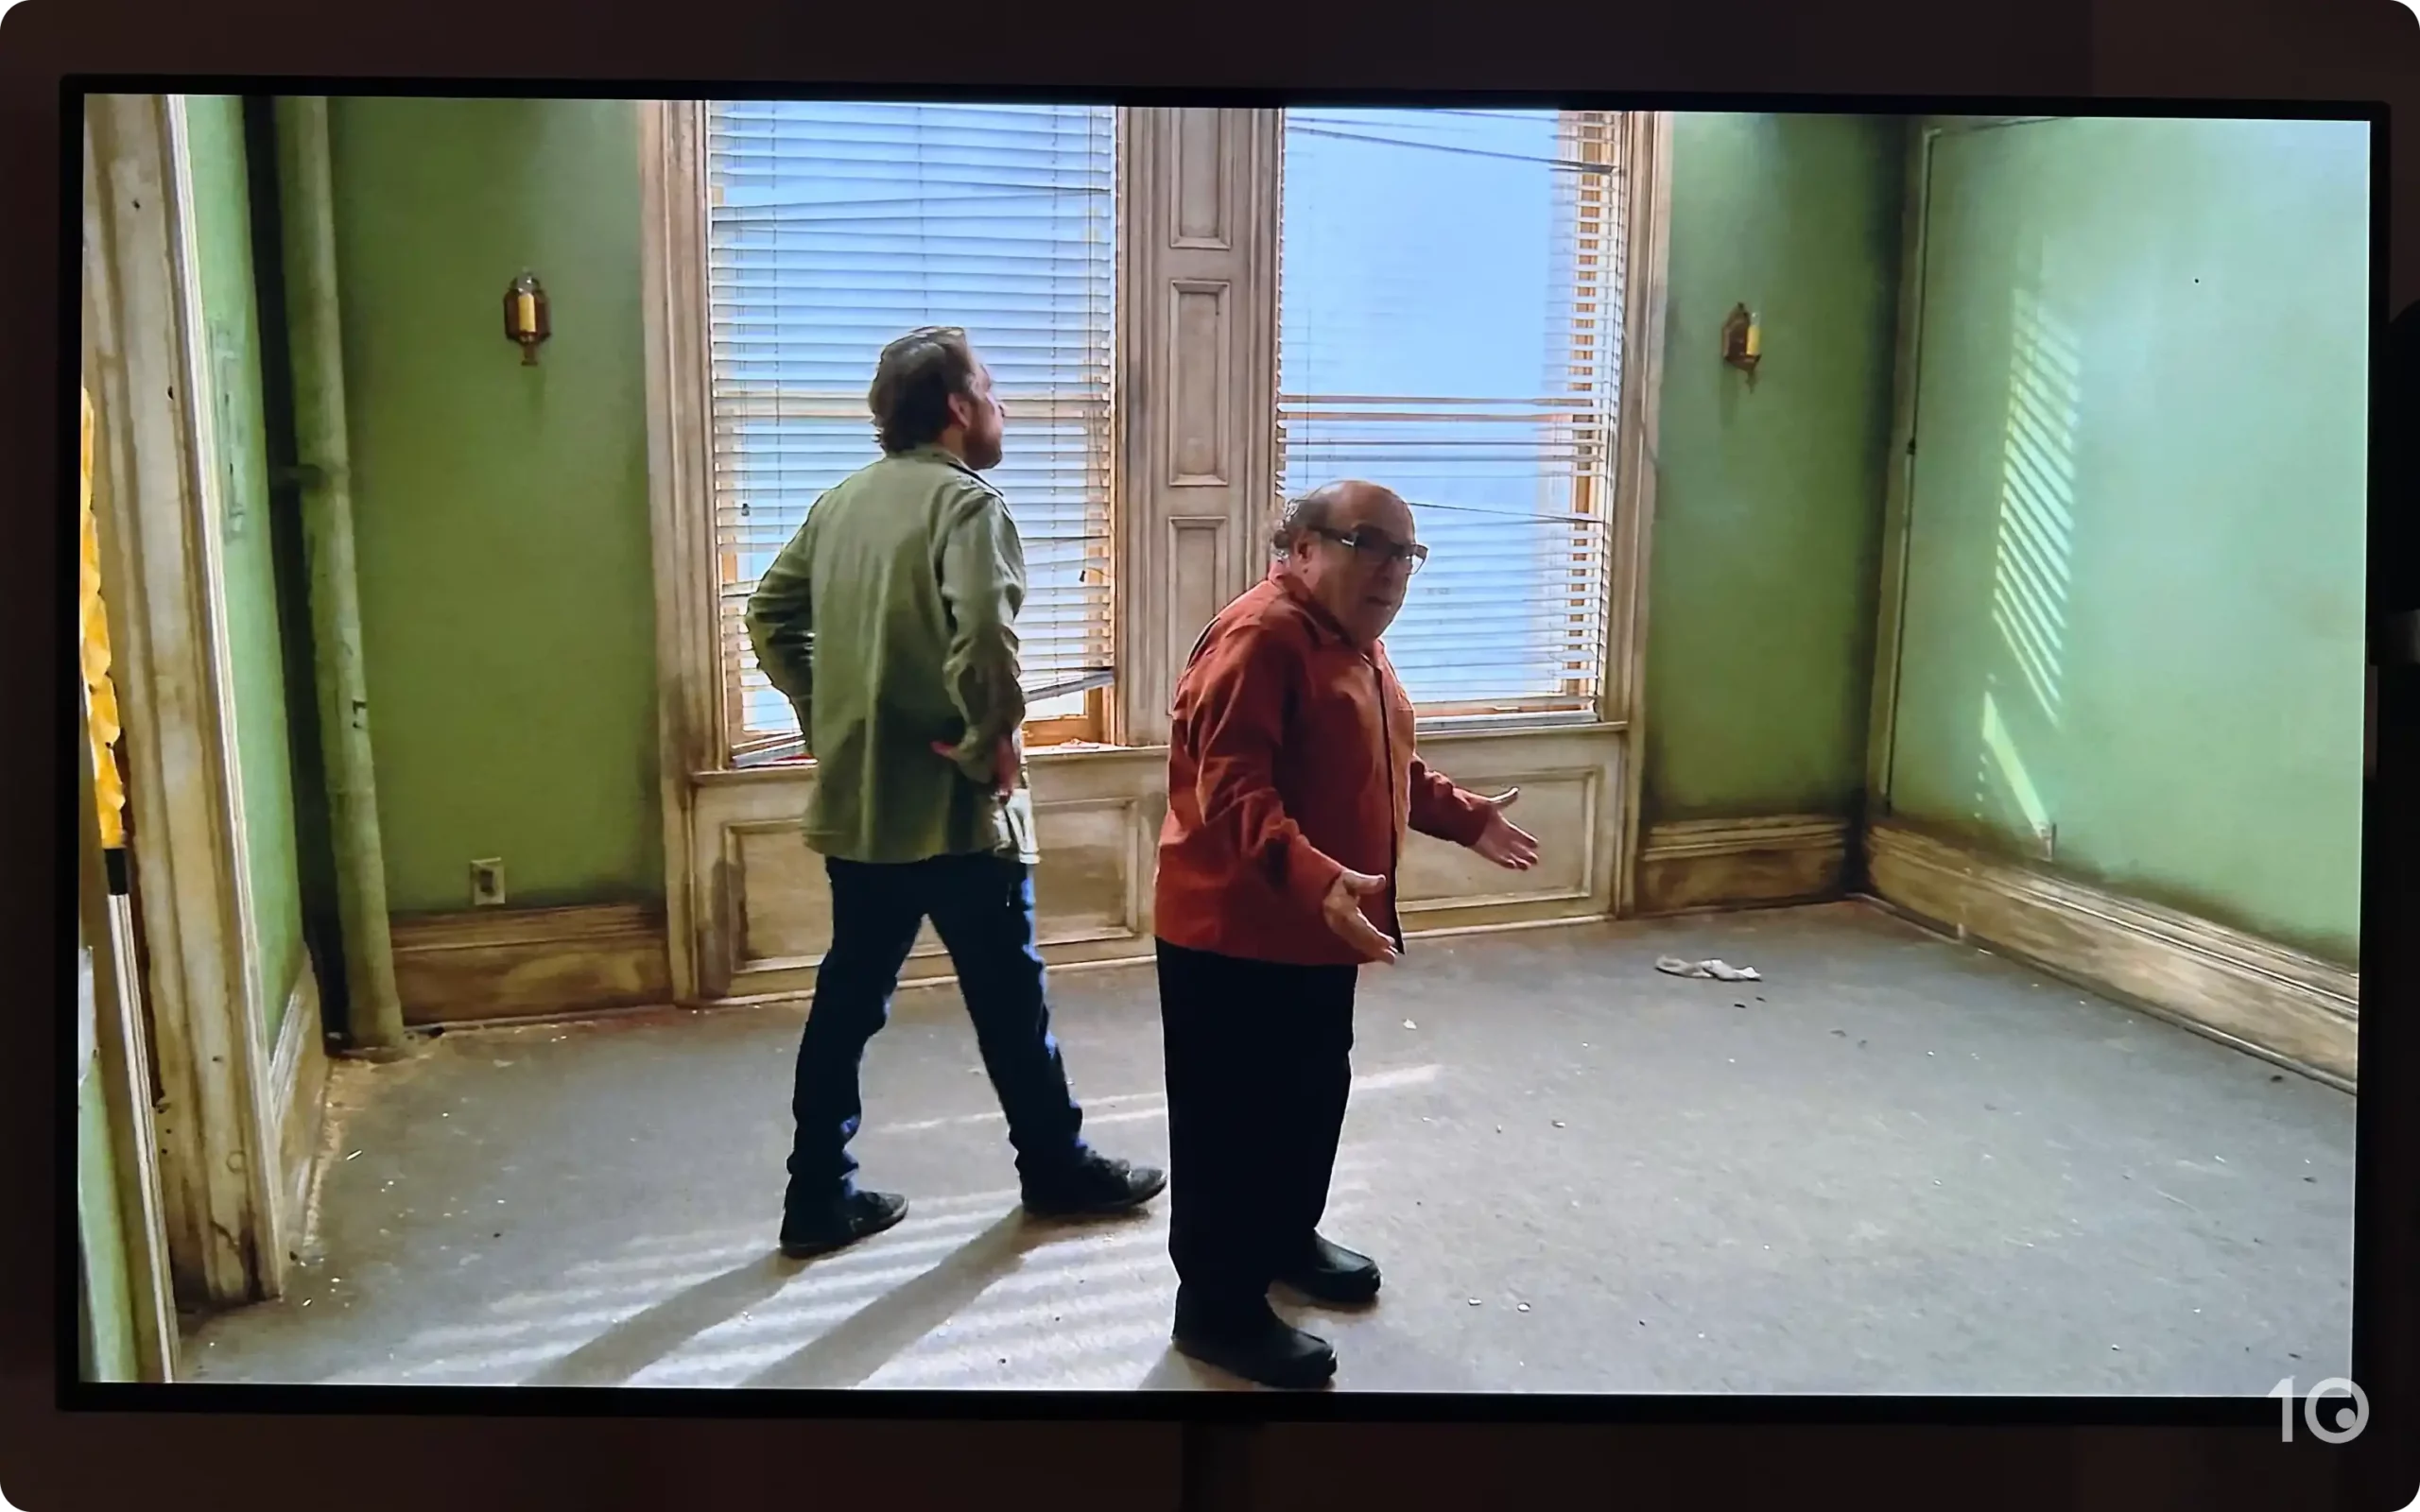 Image of TV show, " It's Always Sunny in Philadelphia", being accessed on an LG TV on UK Netflix using Smart DNS.